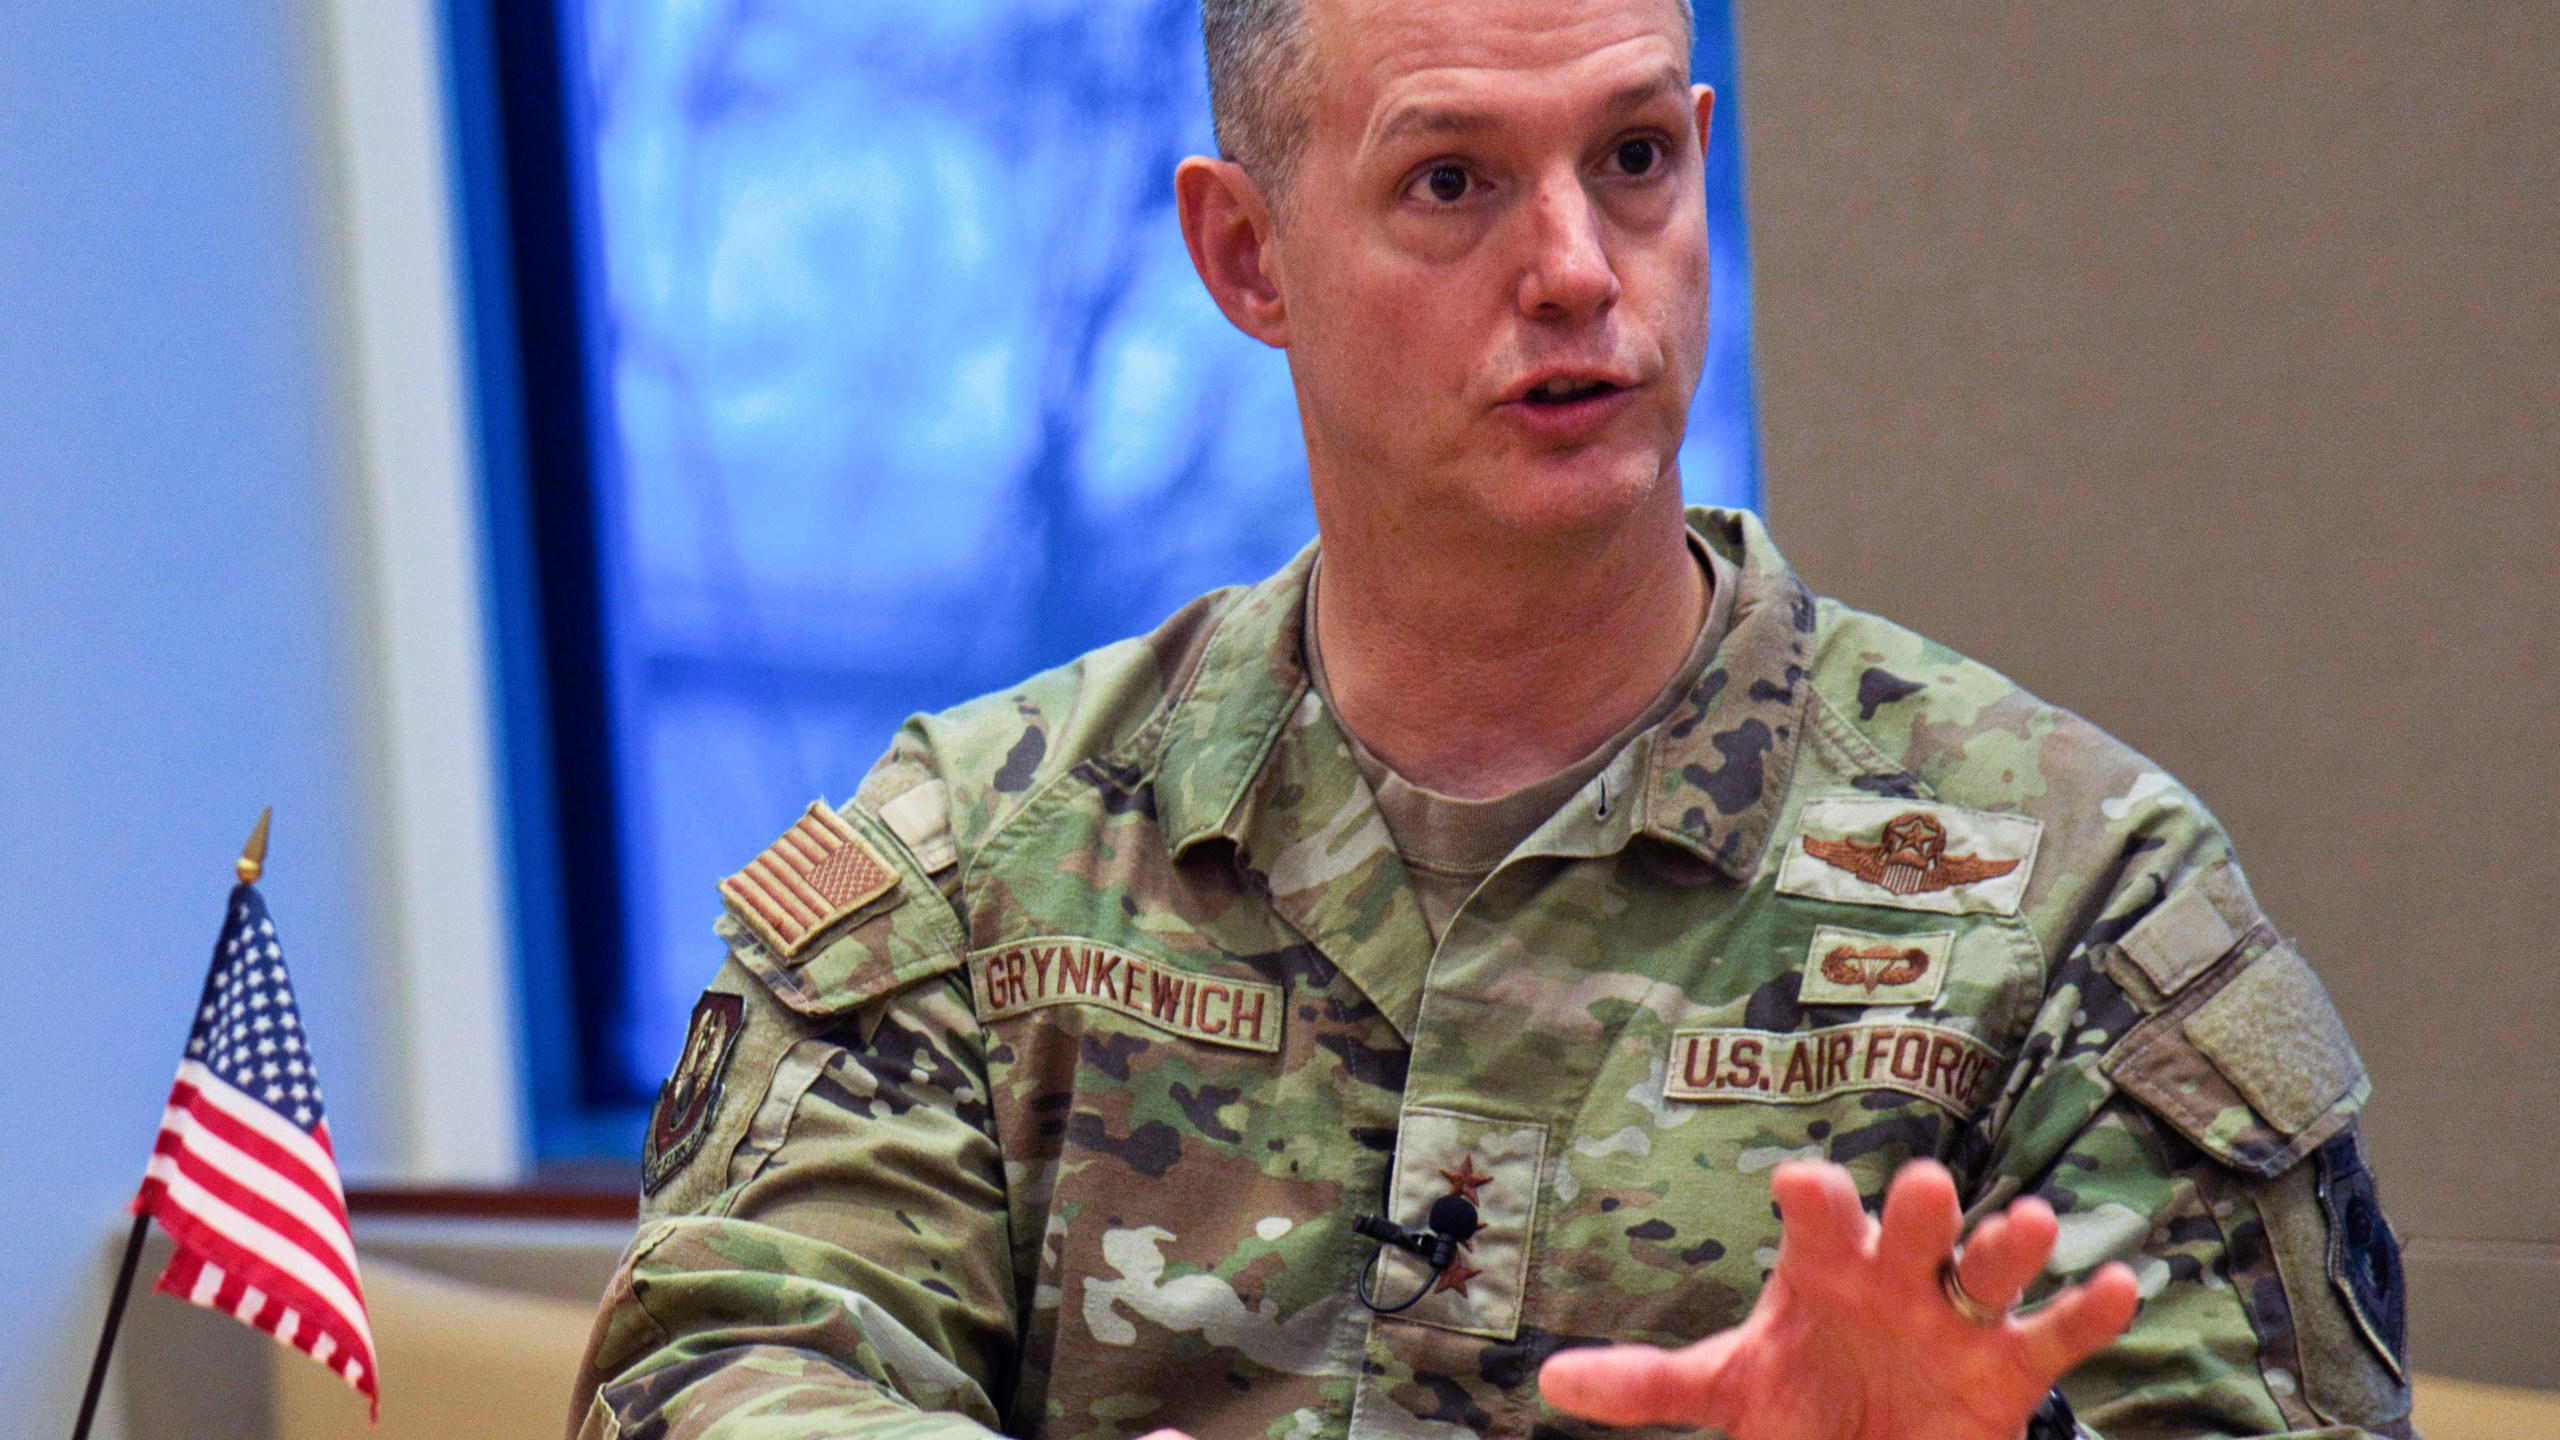 FILE - Lt. Gen. Alexus Grynkewich, the head of U.S. Air Force Central, speaks at a news conference at the U.S. Embassy in Abu Dhabi, United Arab Emirates, Sept. 20, 2023. Grynkewich says Houthi rebels in Yemen may be running through their supplies of drone swarms and anti-ship ballistic missiles and the pace of their attacks has slowed a bit. (AP Photo/Jon Gambrell, File)